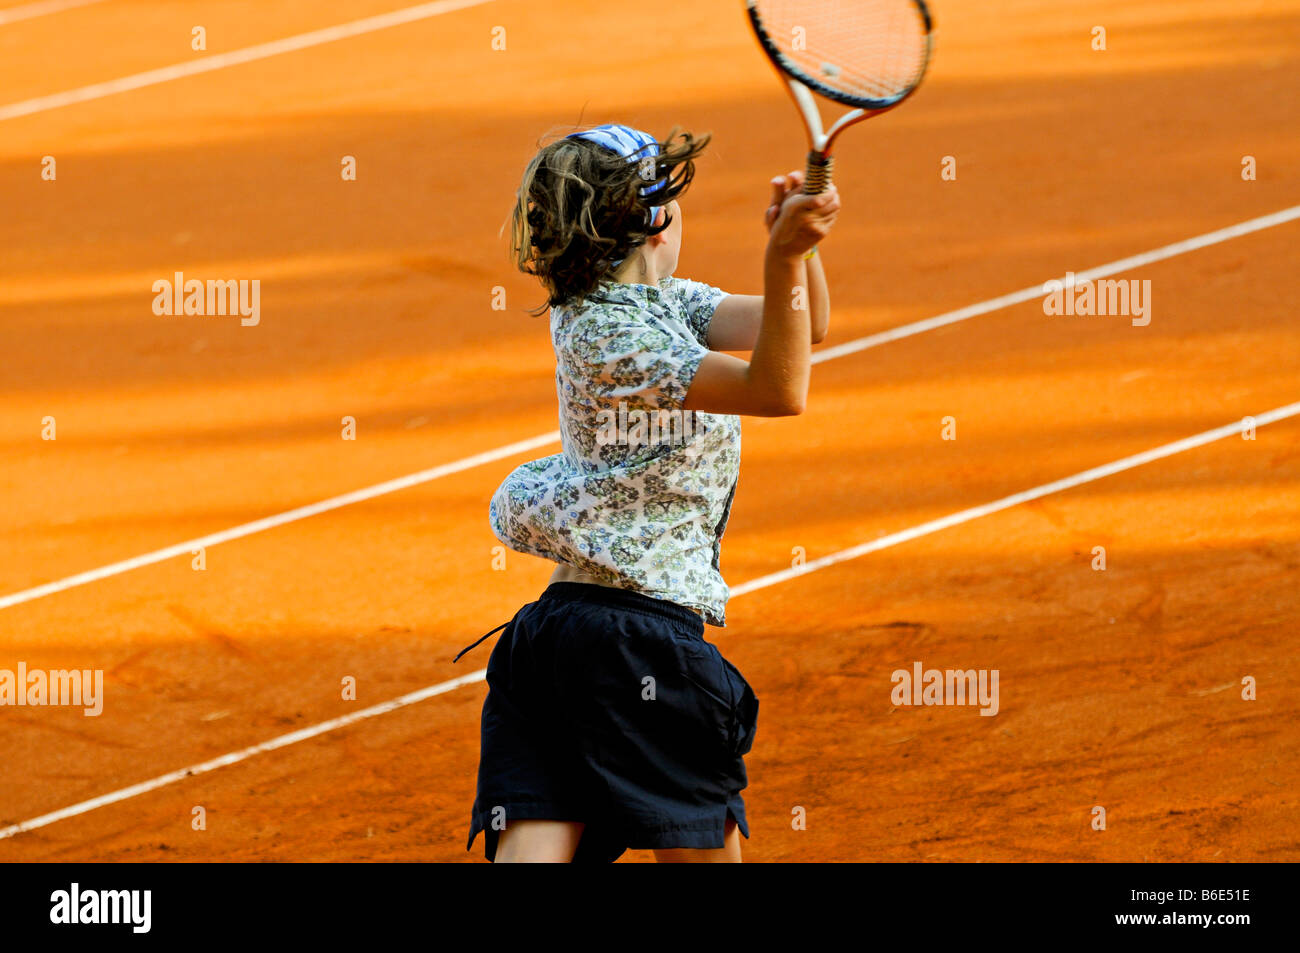 action shot of child playing tennis Stock Photo